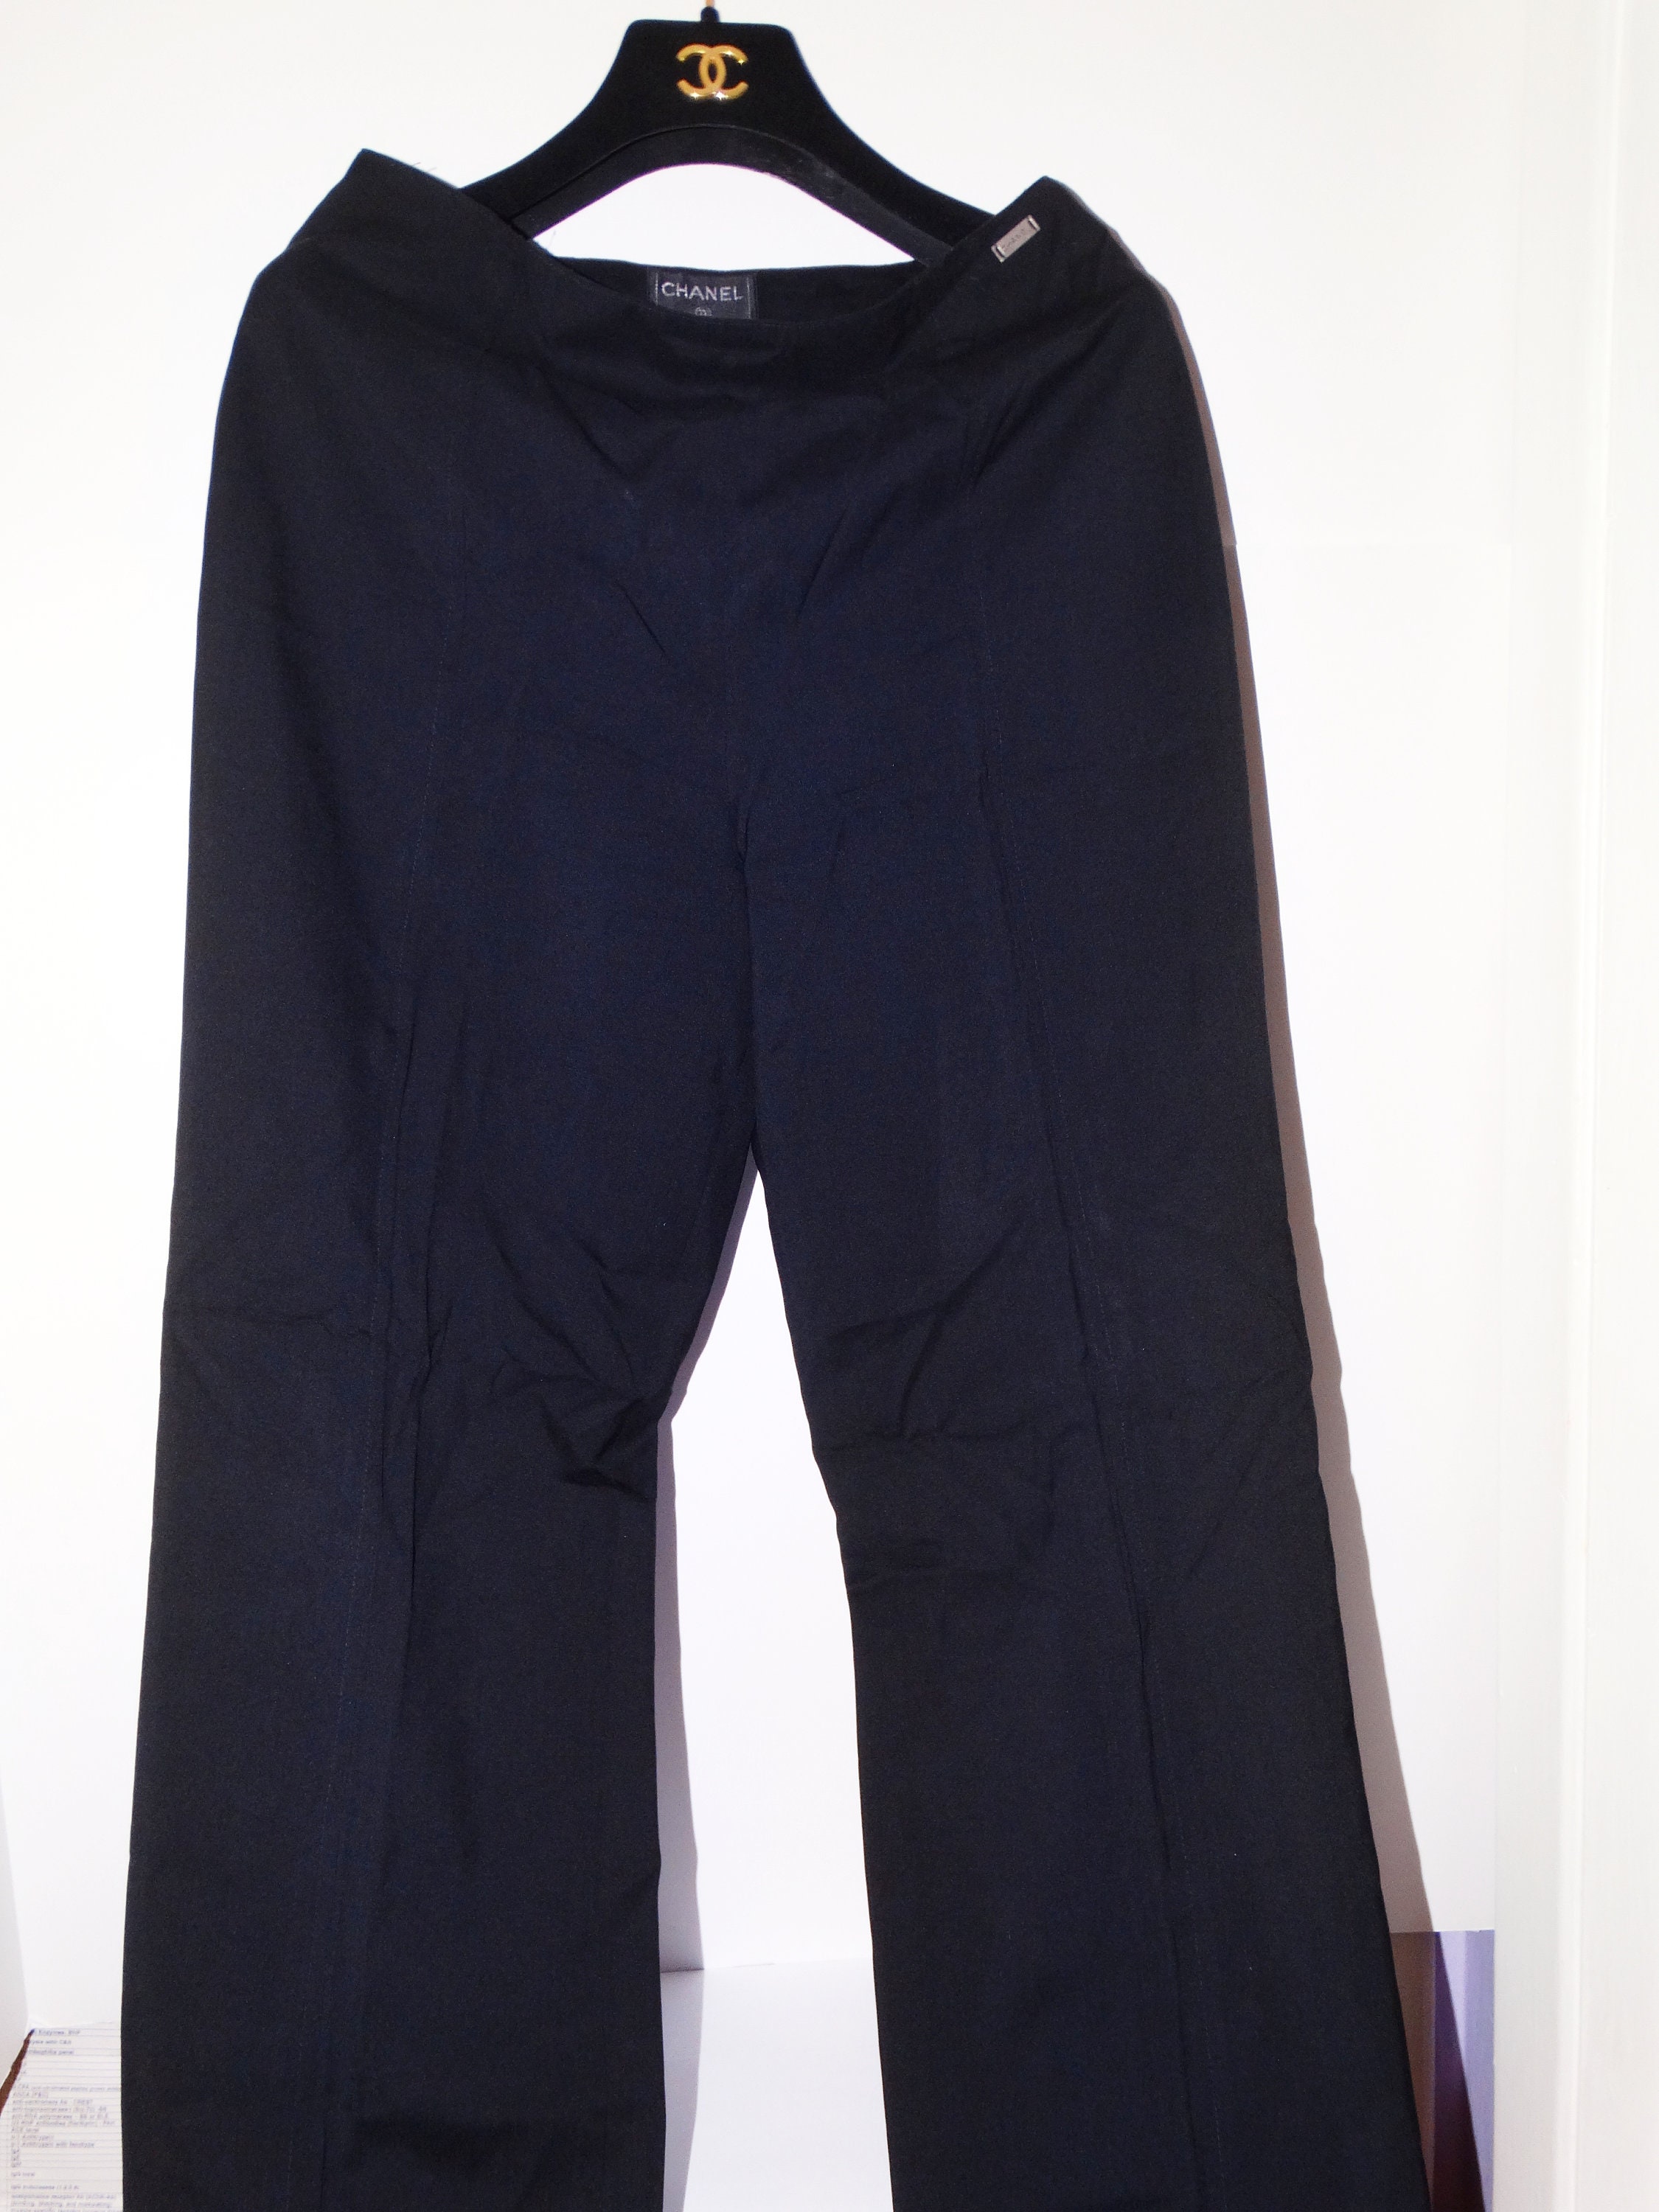 Authentic Chanel Spring 2001 Grey Solid Cotton Pants on sale at